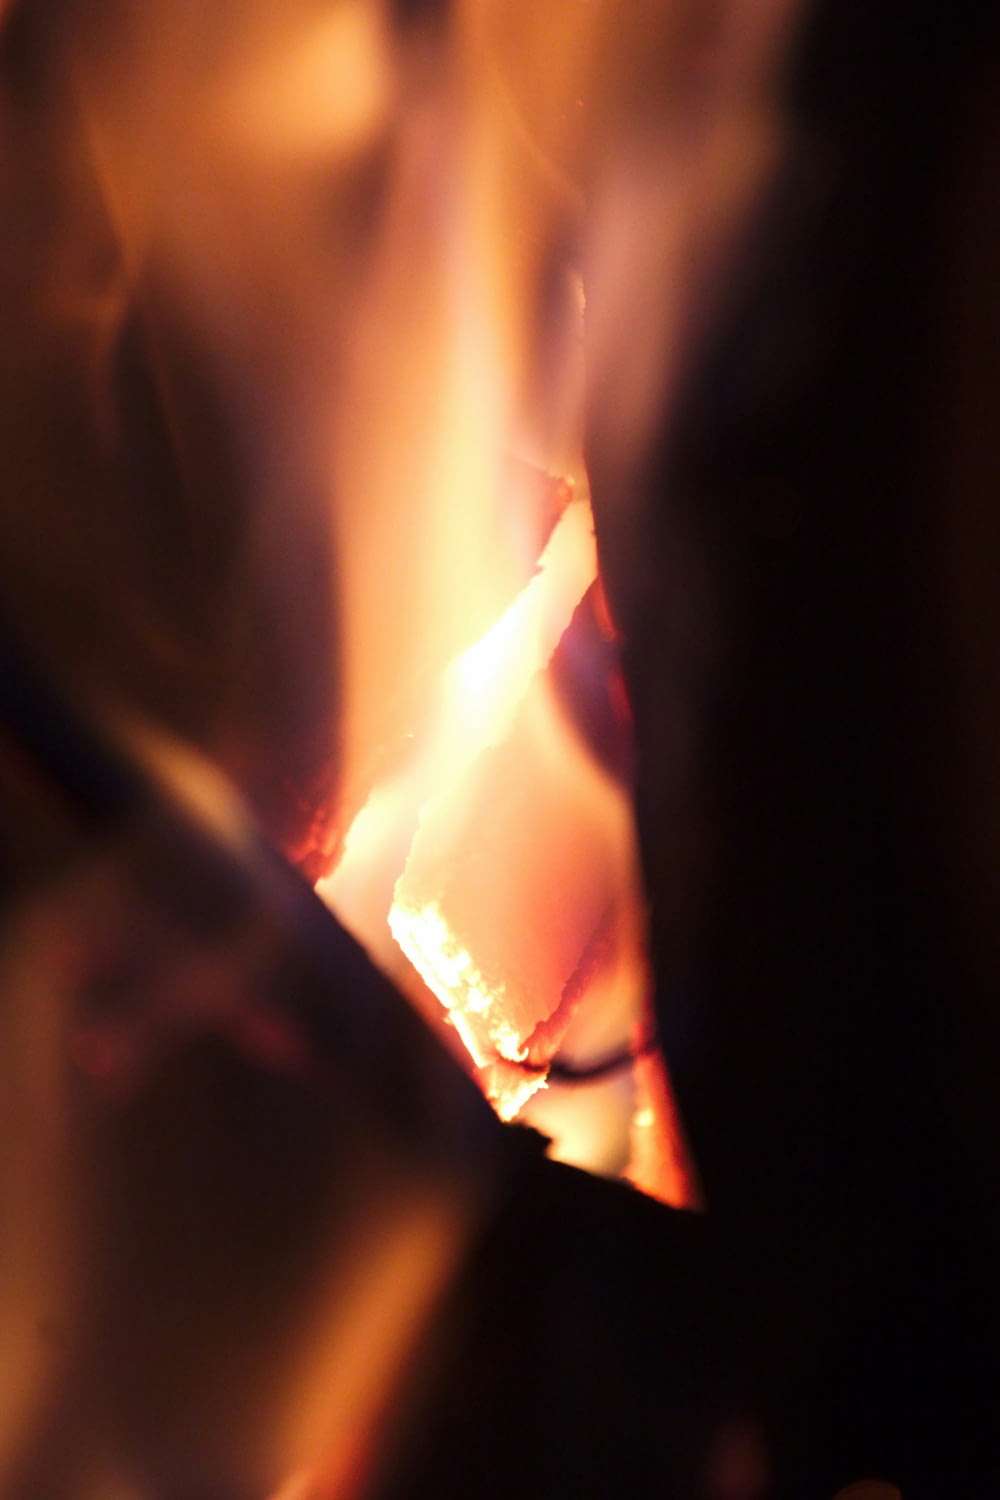 a close up of a fire in a stove